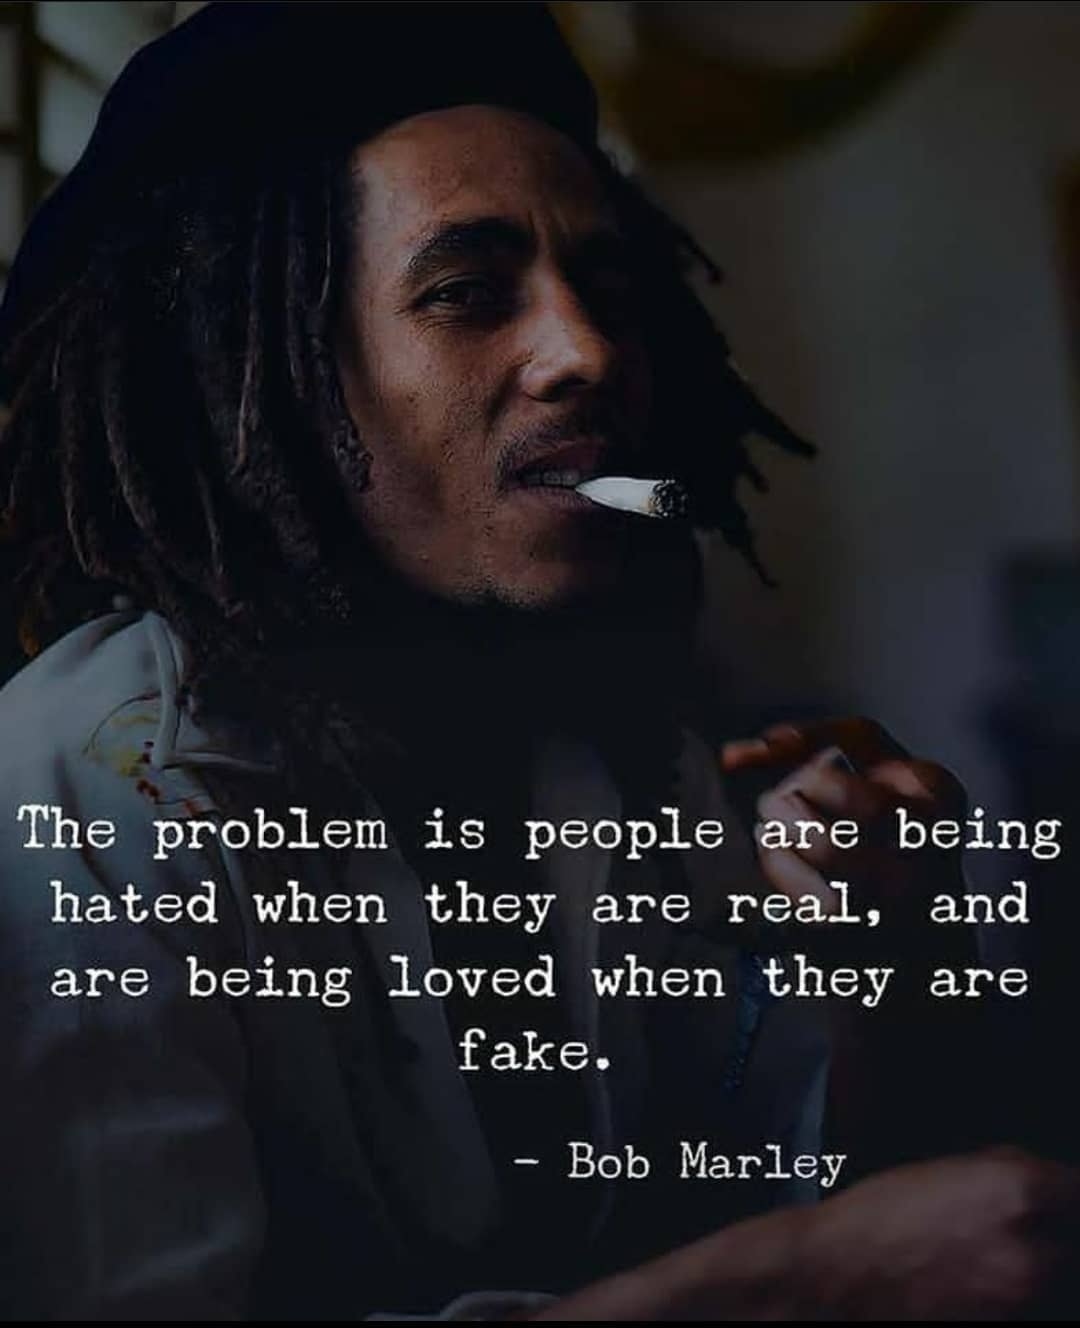 The problem is people are being hated when they are real, and are being loved when they are fake. —Bob Marley